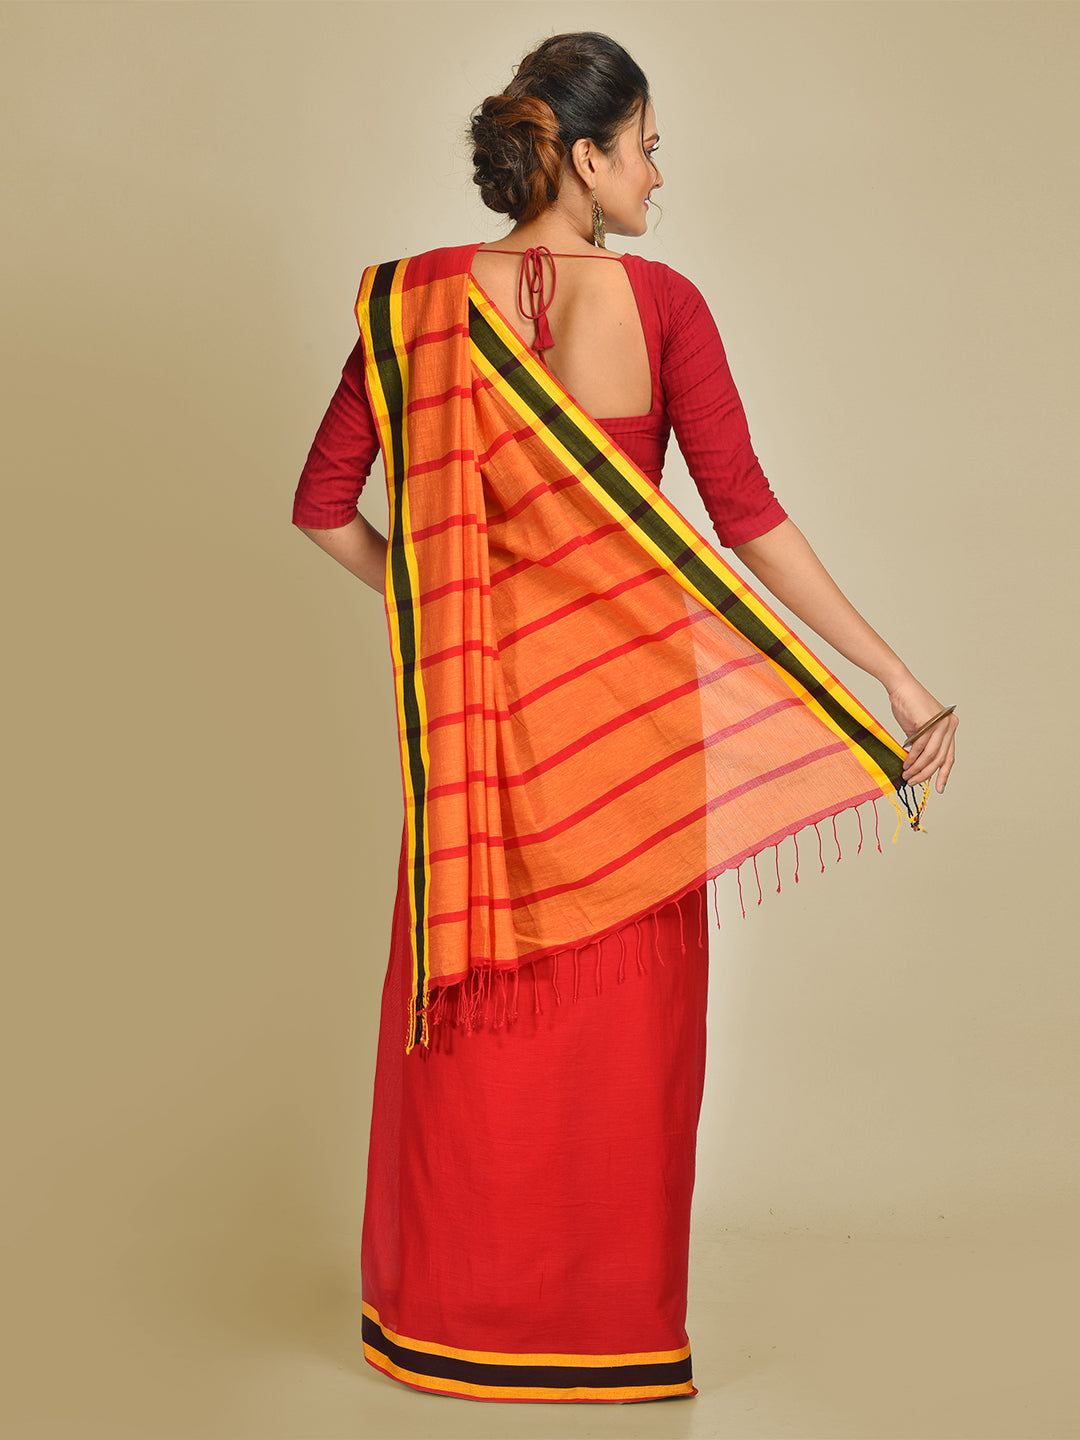 Women's Red Soft Pure Cotton Solid Handloom Saree with Unstitched Blouse-Sajasajo